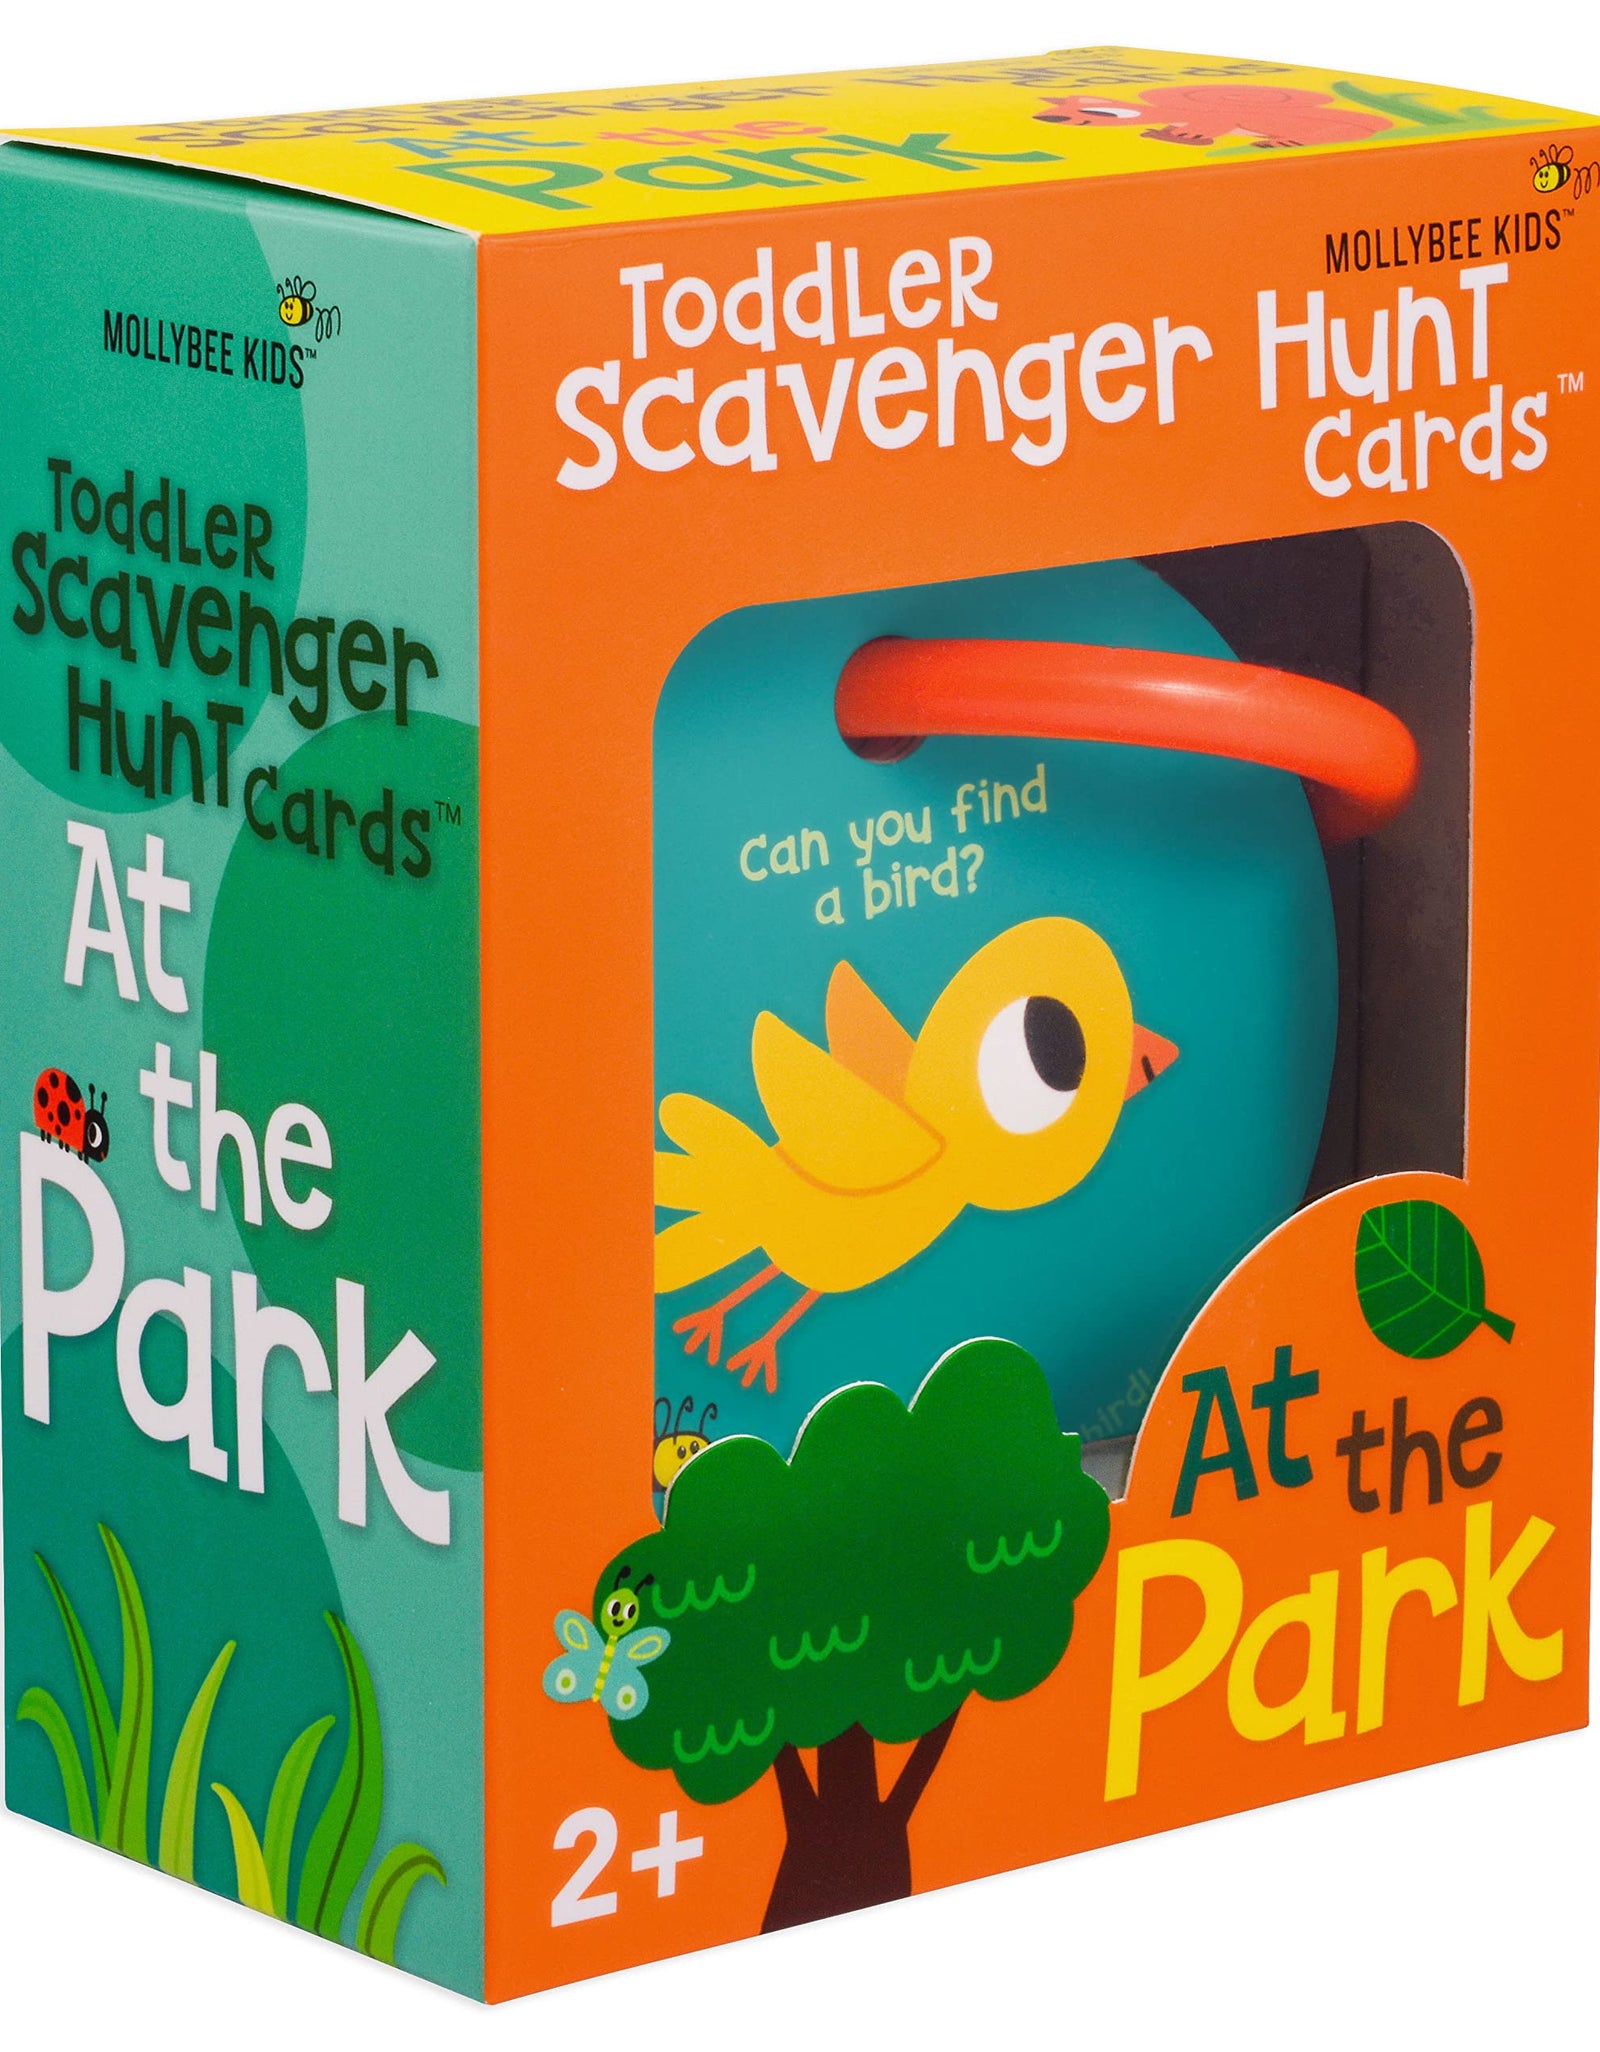 Mollybee Kids Outdoor Toddler Scavenger Hunt Cards at The Park